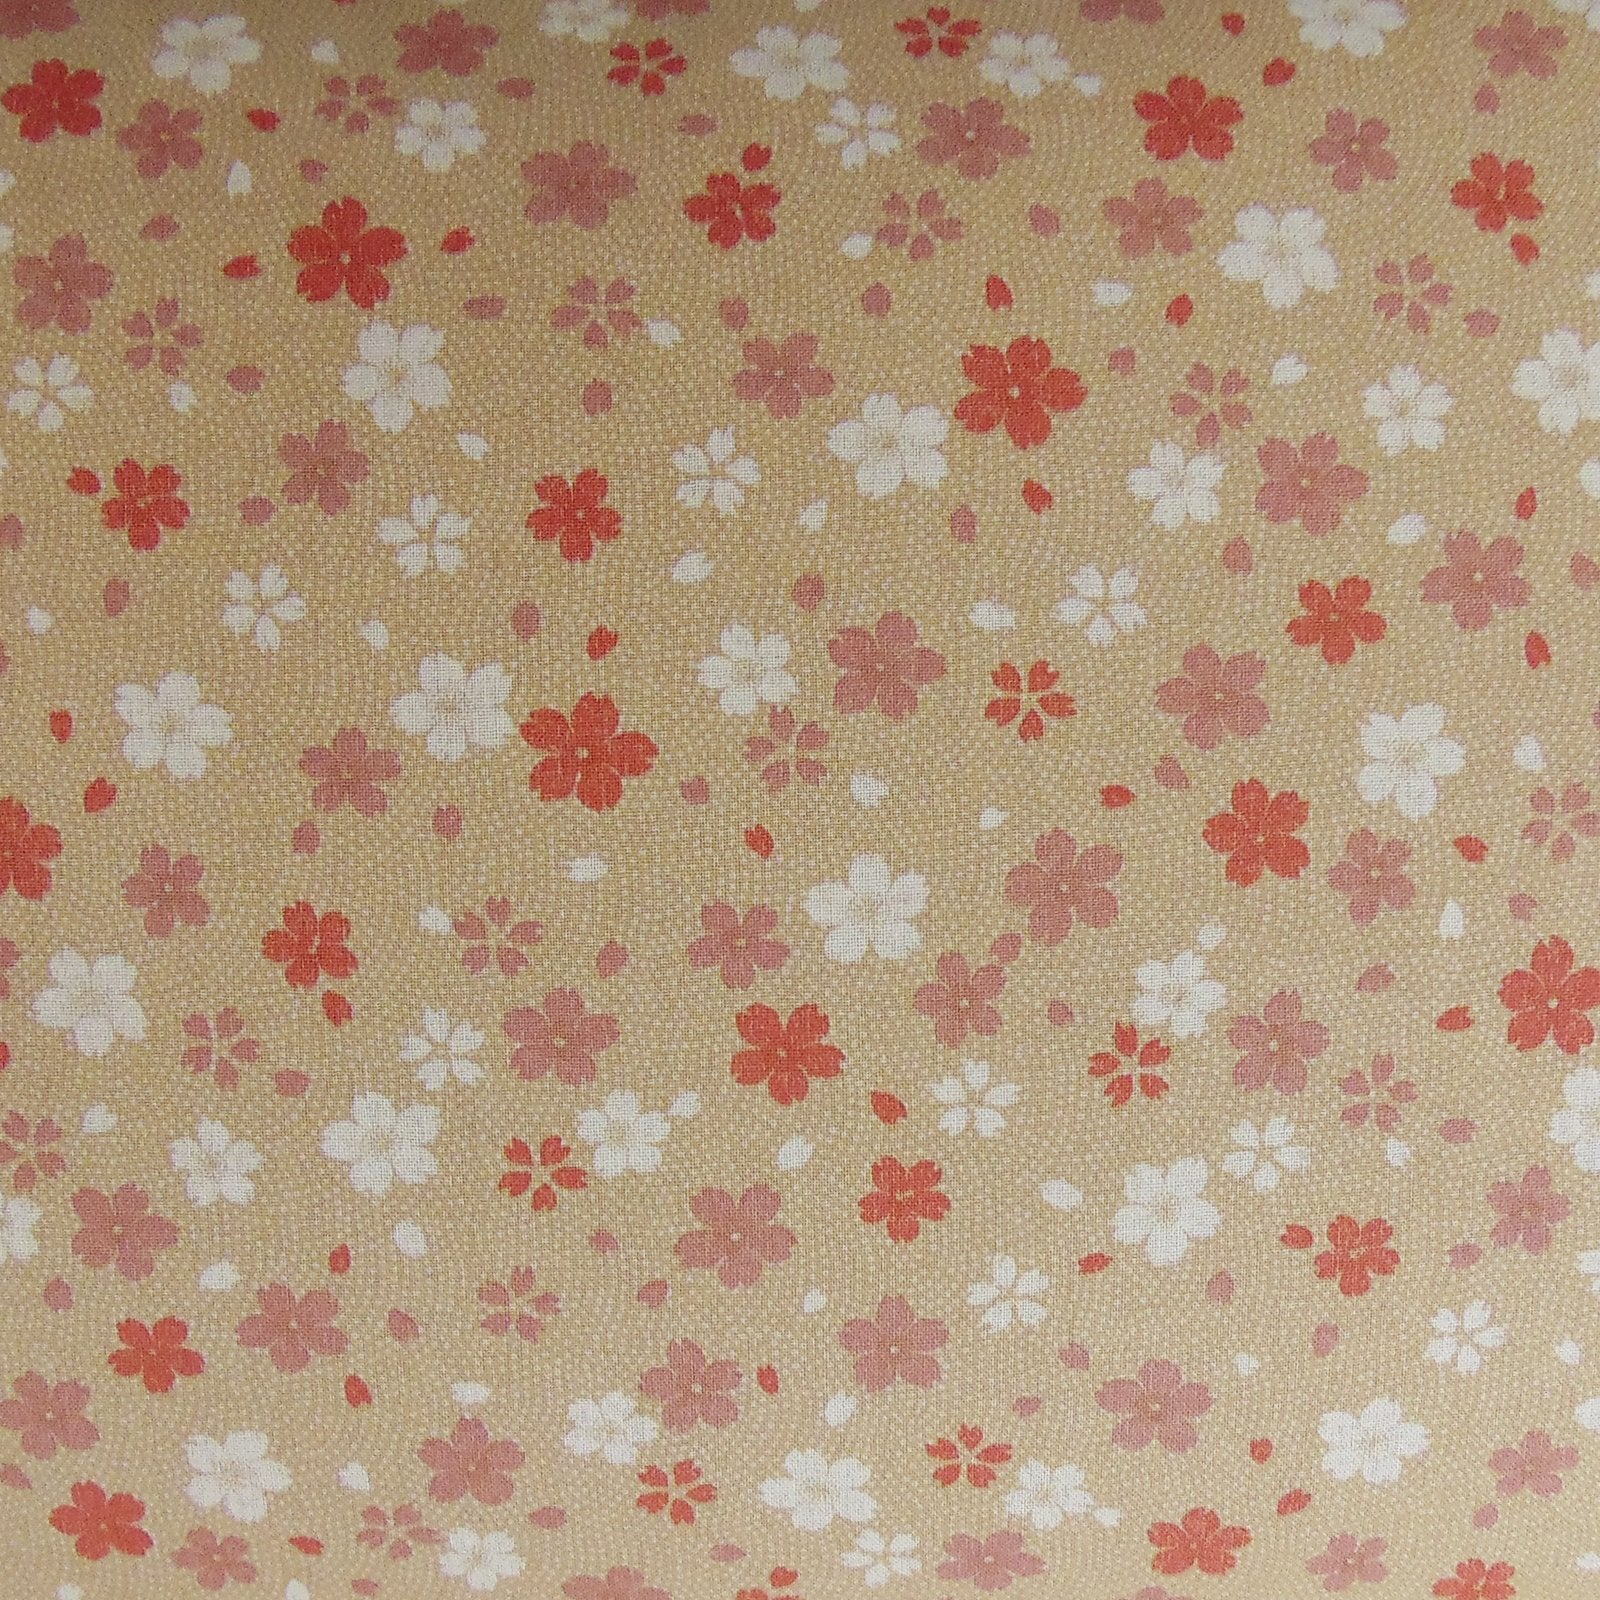 Imported Japanese Fabric - Cherry Blossom Tan_Fabric_Imported from Japan_100% Cotton_Japanese Sleep System